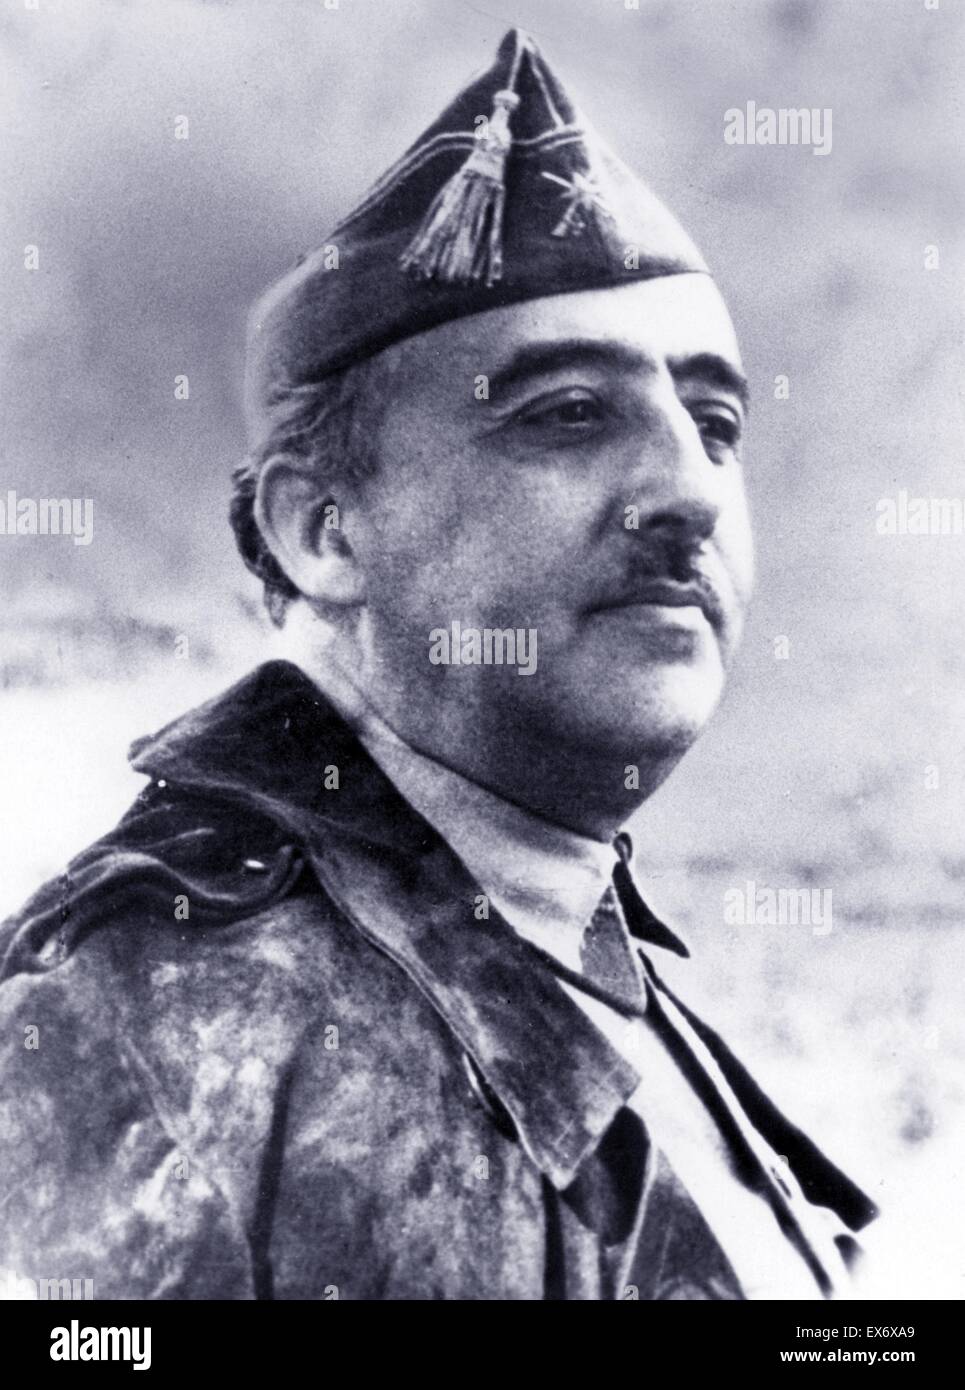 Francisco Franco 1892-1975. Spanish general and the dictator of Spain from 1939 until his death in 1975 Stock Photo